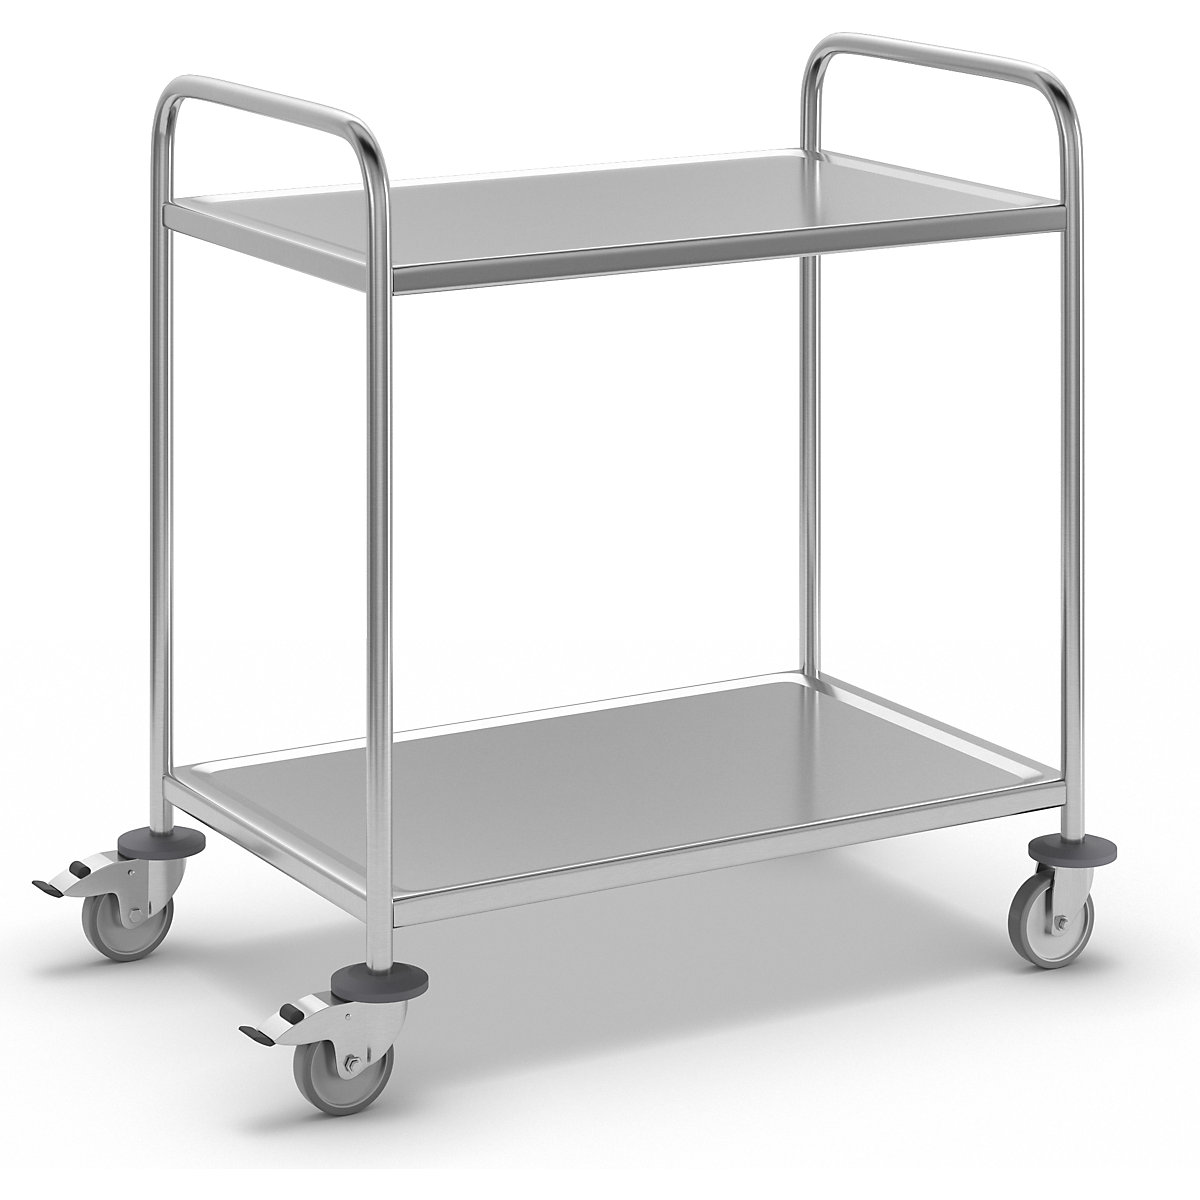 Stainless steel serving trolley – Kongamek, LxWxH 710 x 400 x 805 mm, with 2 shelves-1